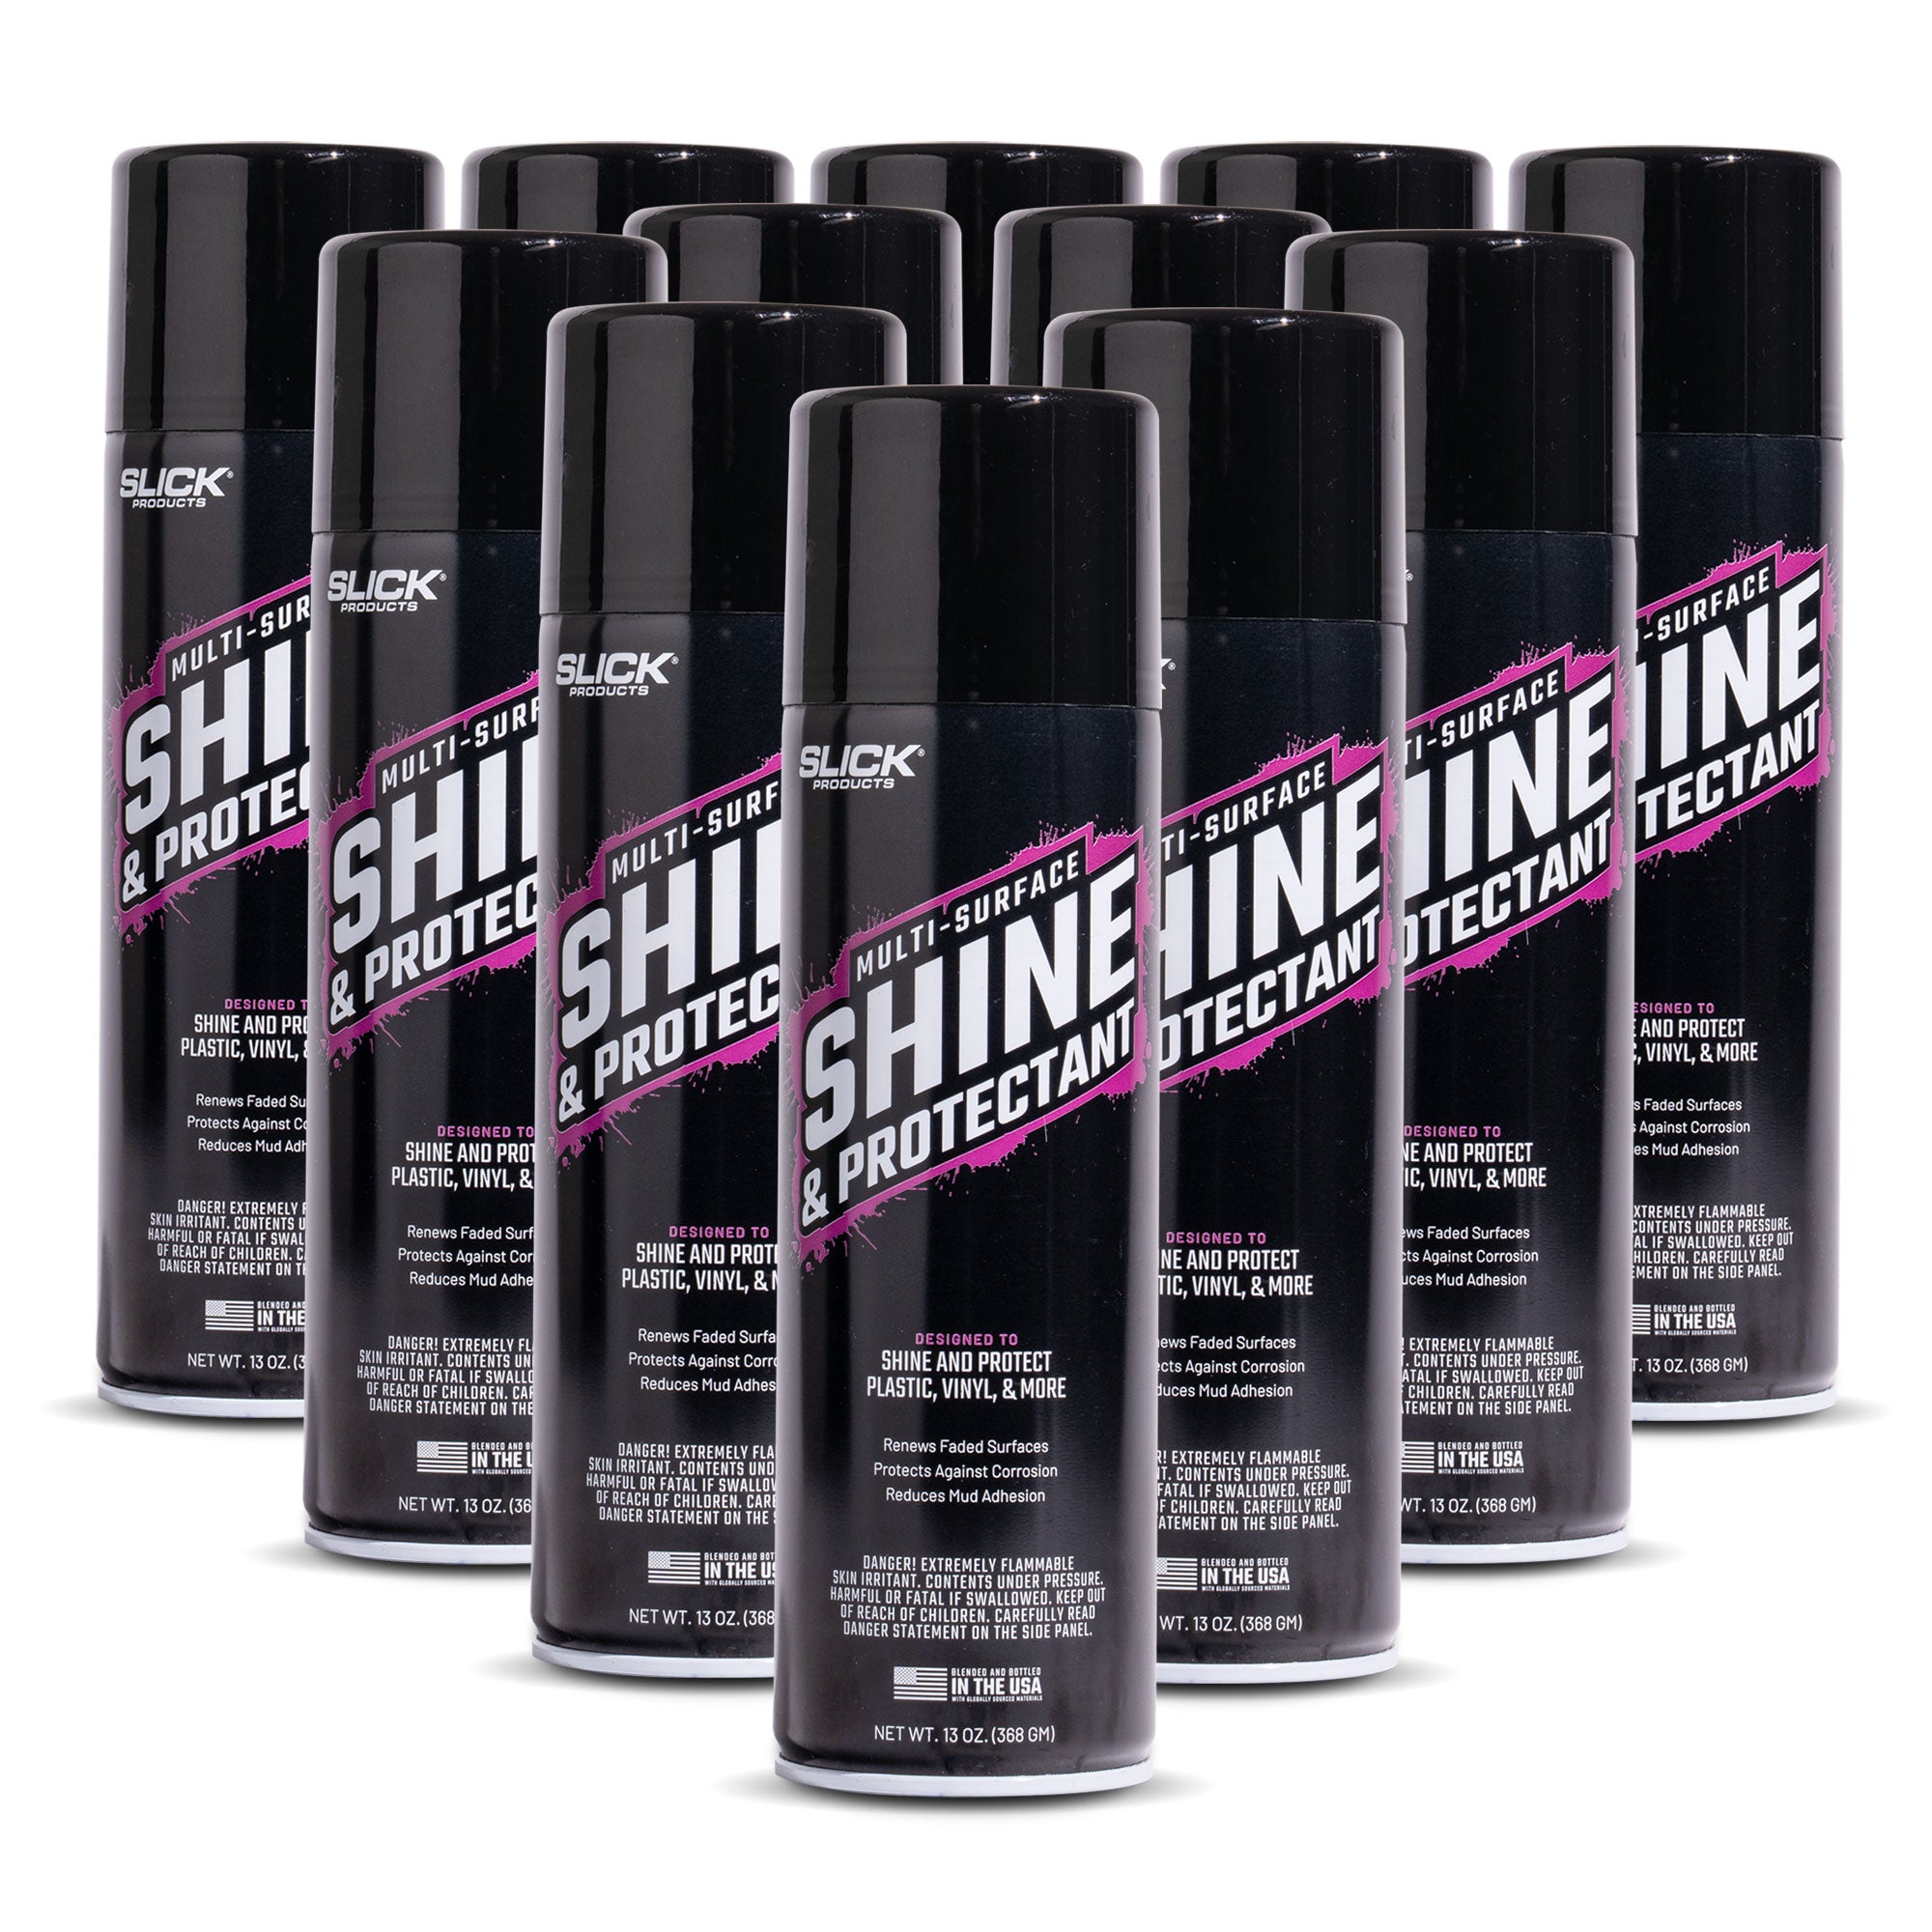 Shine Special Offer